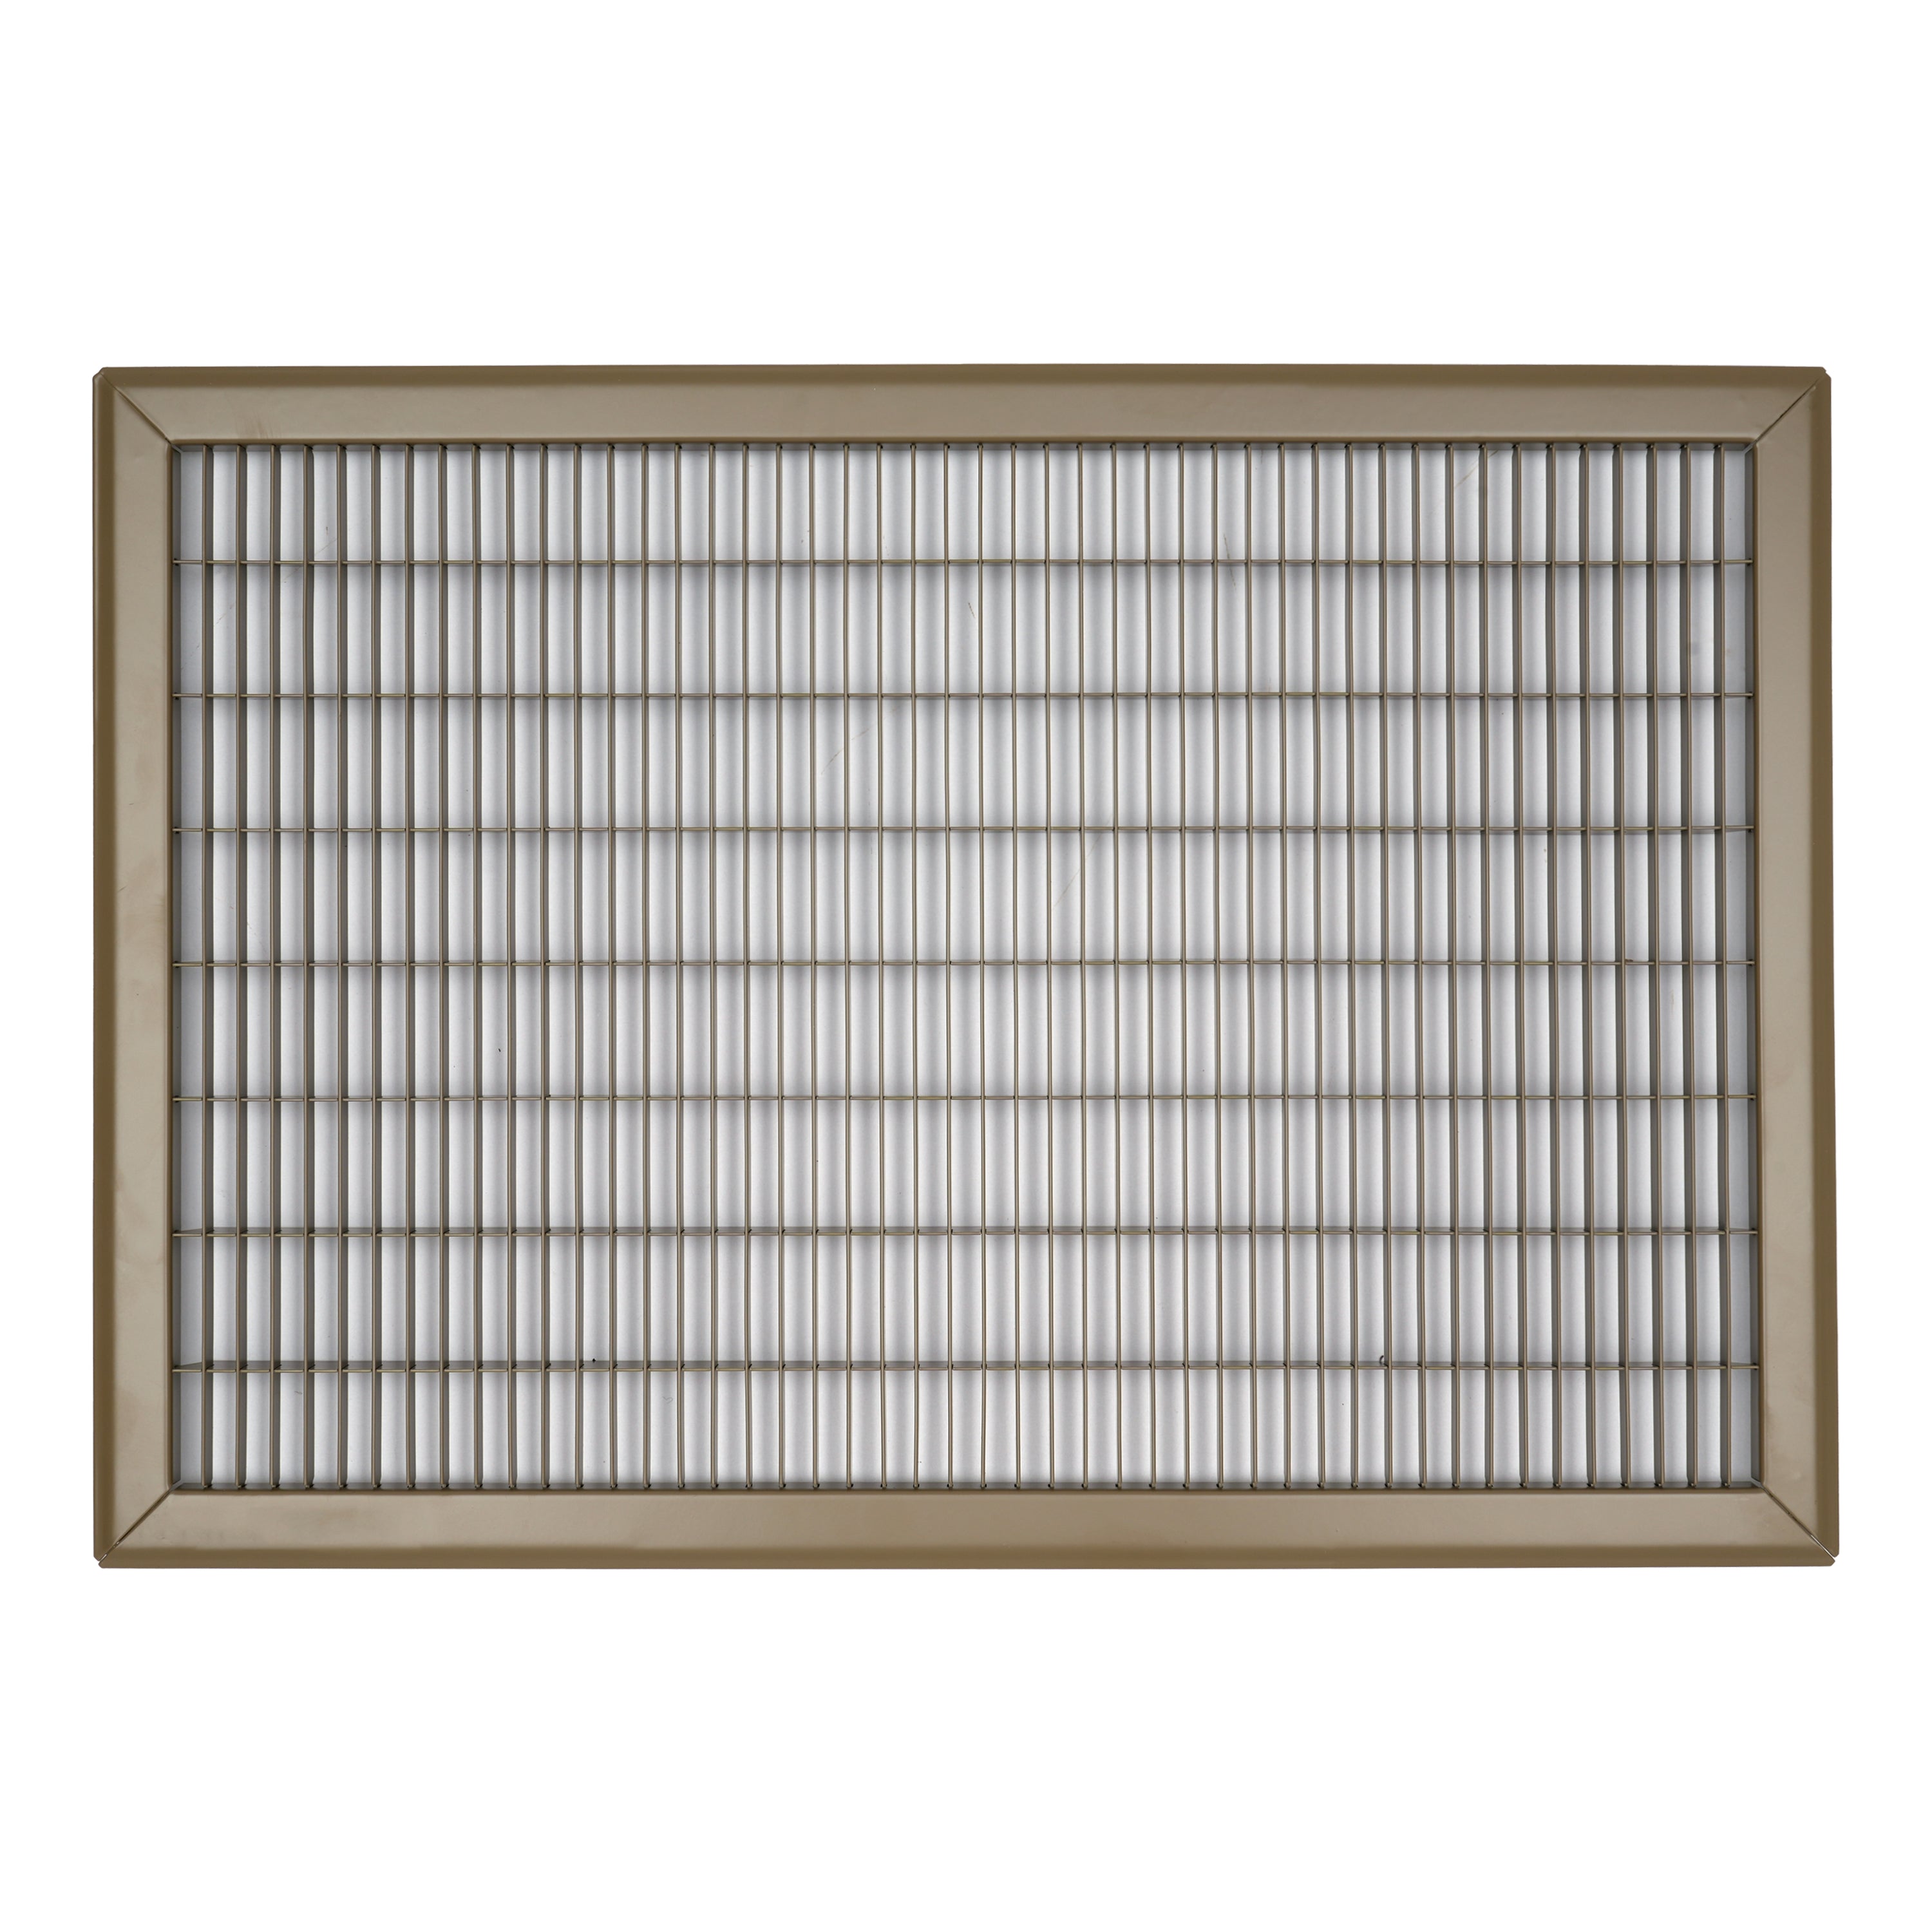 16"W x 24"H [Duct Opening] Return Air Floor Grille | Vent Cover Grill for Floor - Brown| Outer Dimensions: 17.75"W X 25.75"H